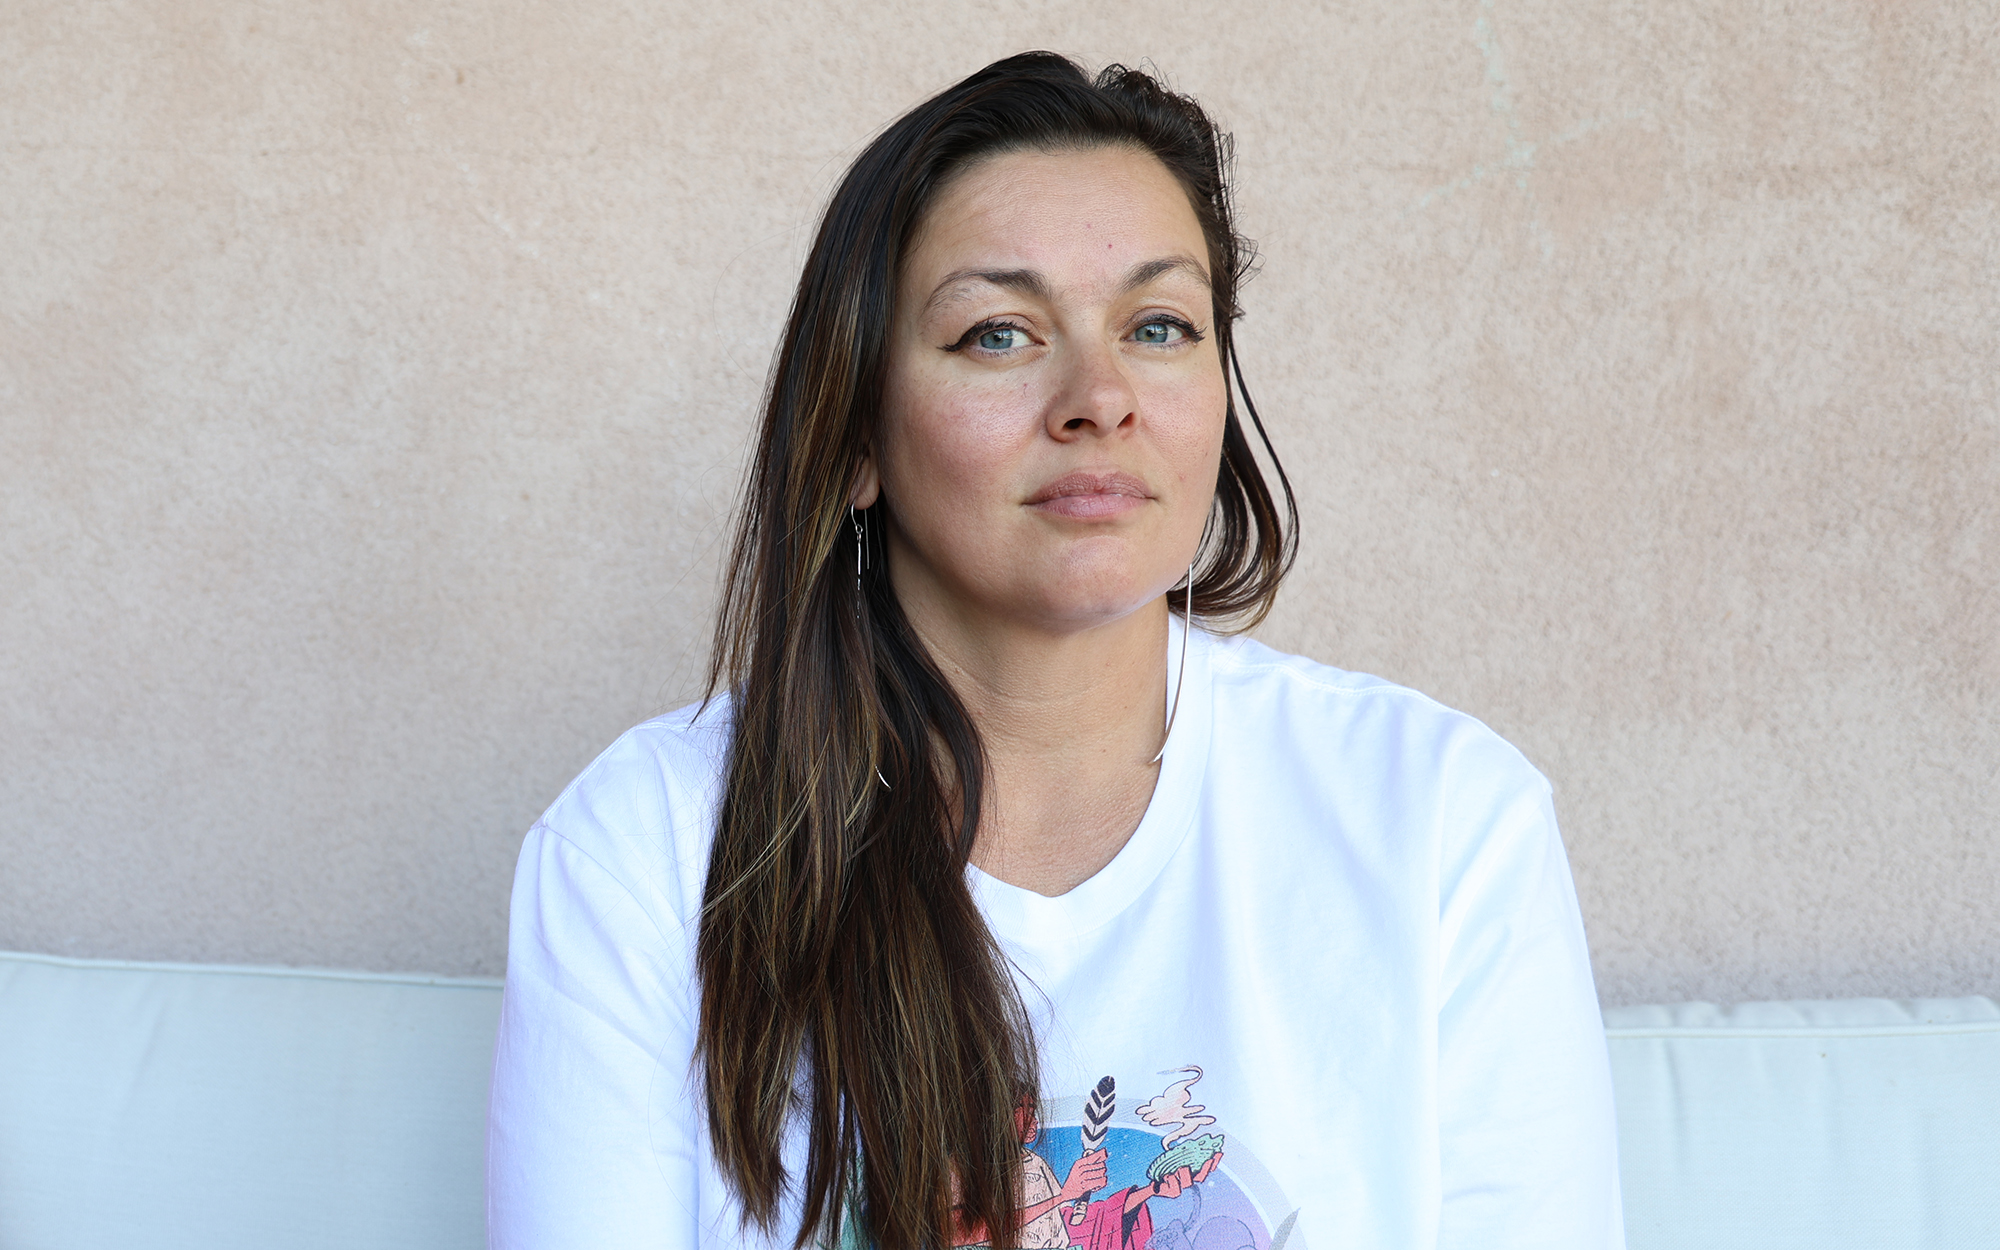 Melissa Rose, a midwife based in Santa Fe, N.M., has been learning about traditional plants and herbs Indigenous women use to regulate menstrual cycles and manage abortions. (Photo by Noel Lyn Smith/News21)